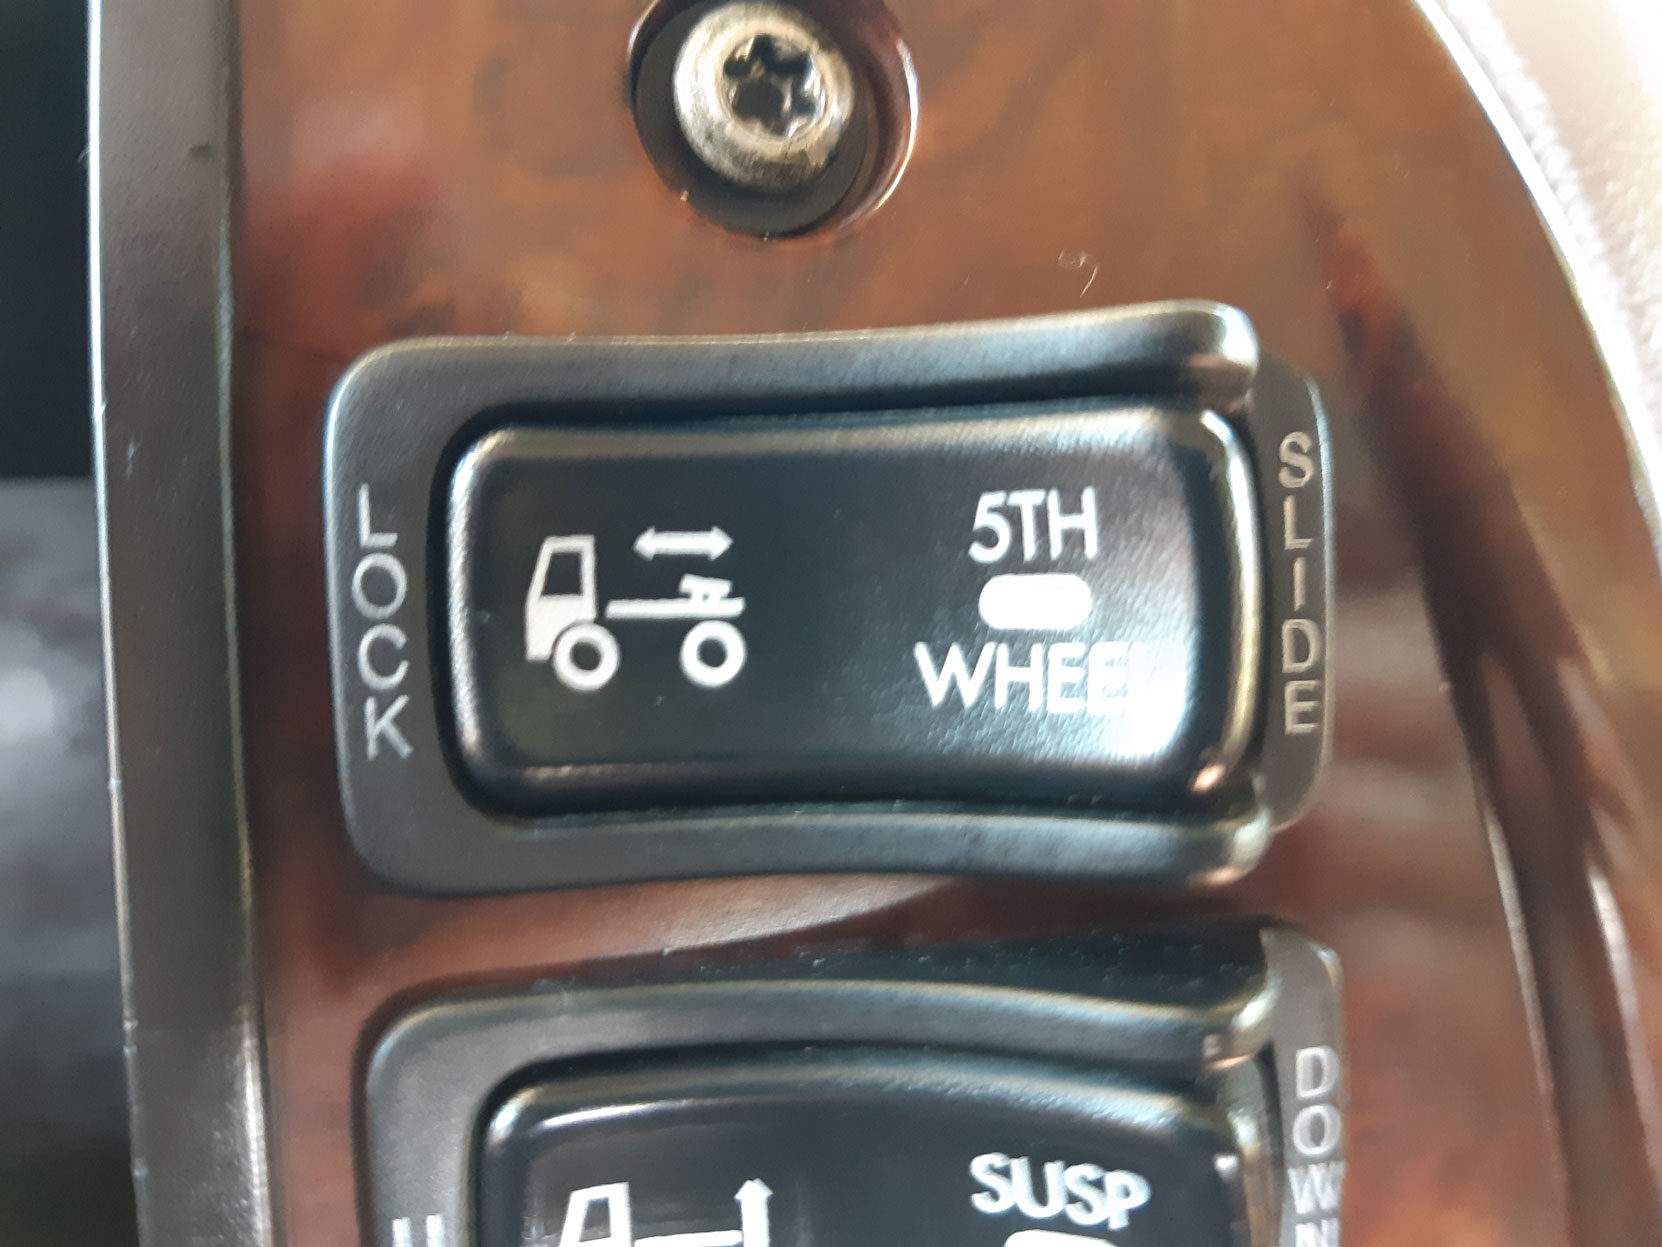 5th Wheel Slide switch on the dash of our Mack Vision day cab (photo: West Coast Driver Training & Education Inc.)